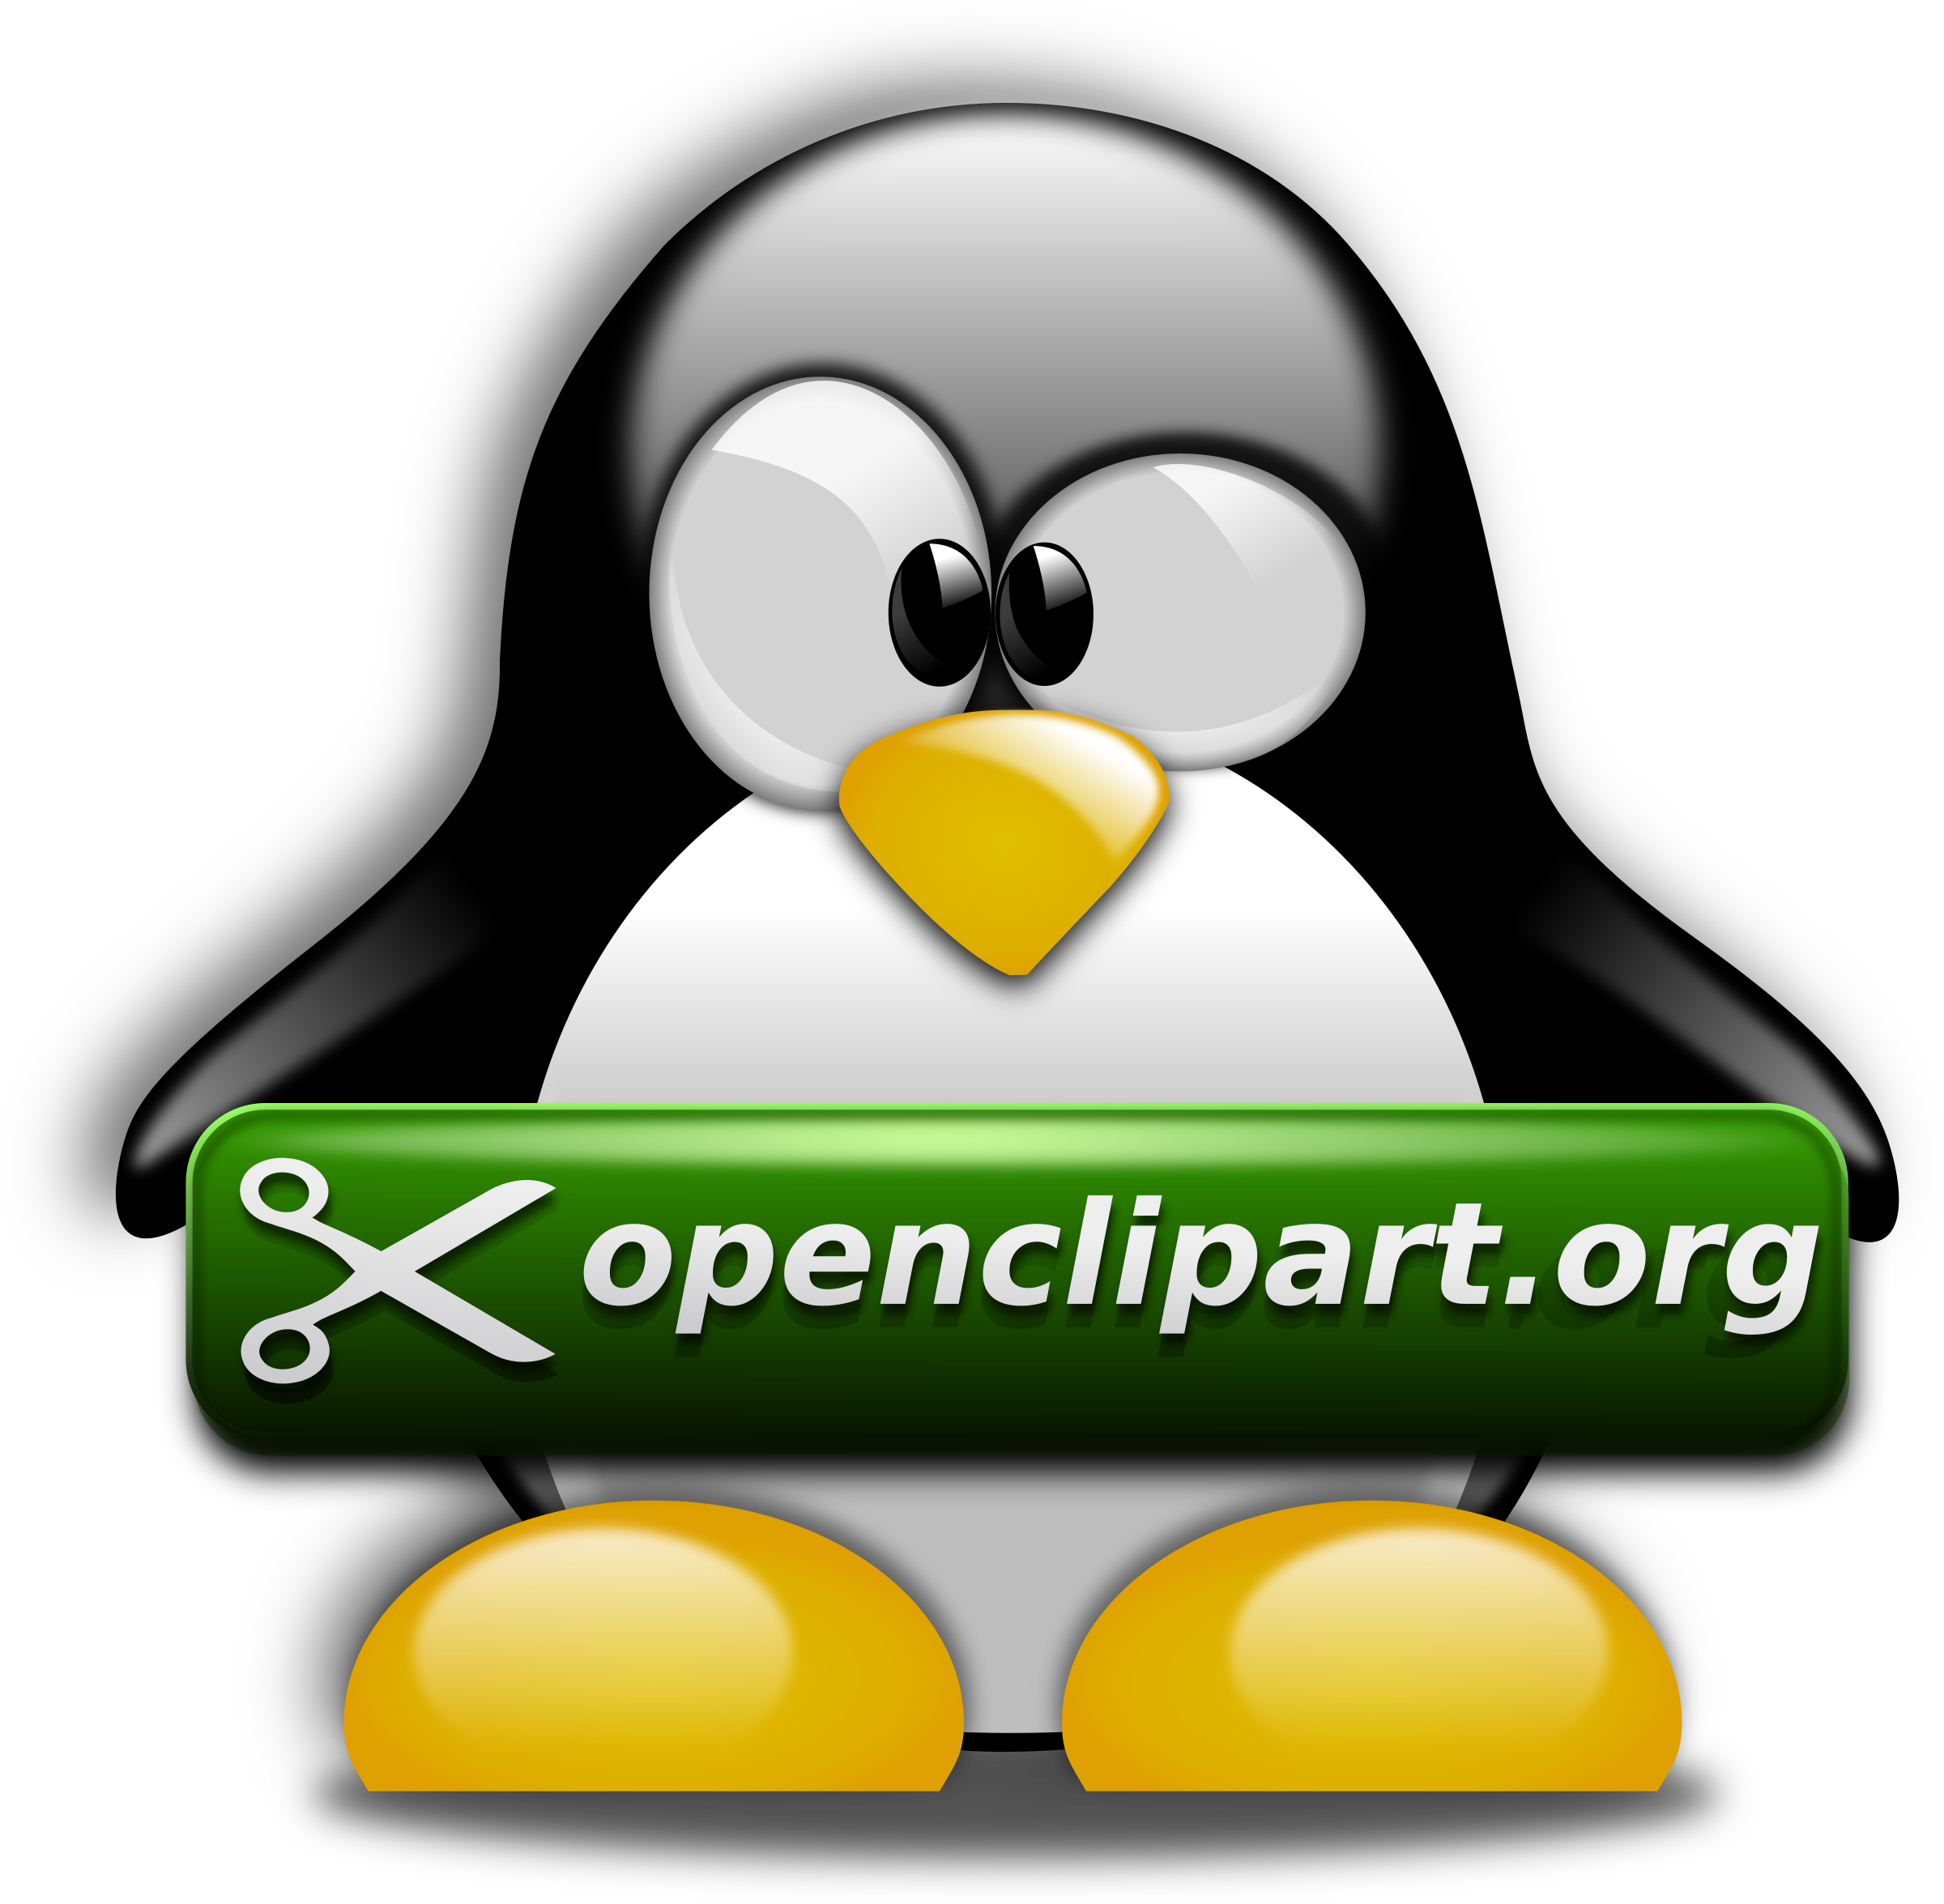 Download Tux Openclipart Dot Org Icons Png Free Png And Icons Downloads